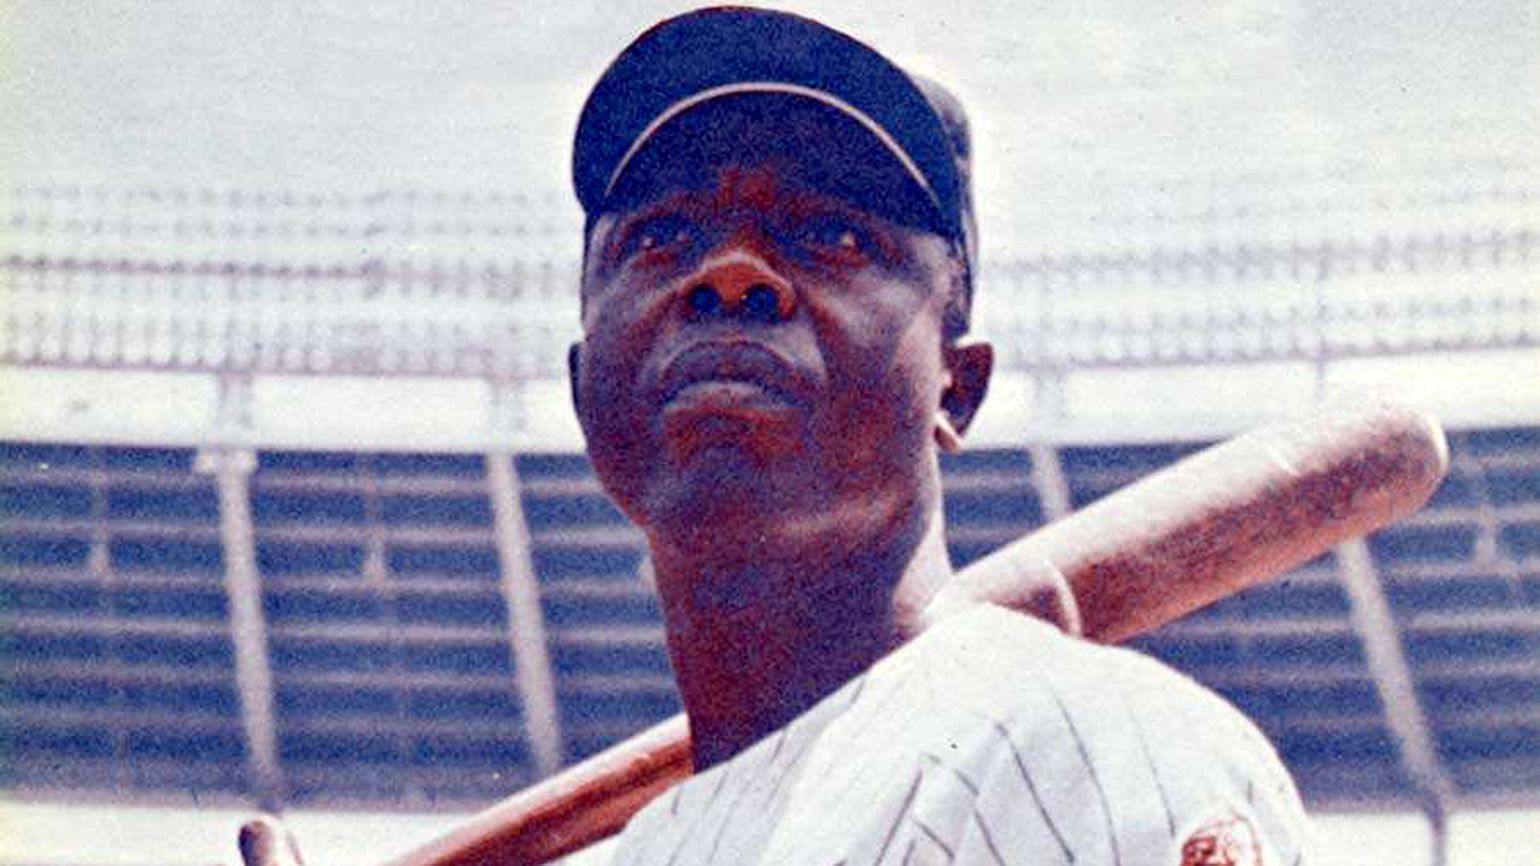 Hank Aaron was known for his philanthropy and helping others